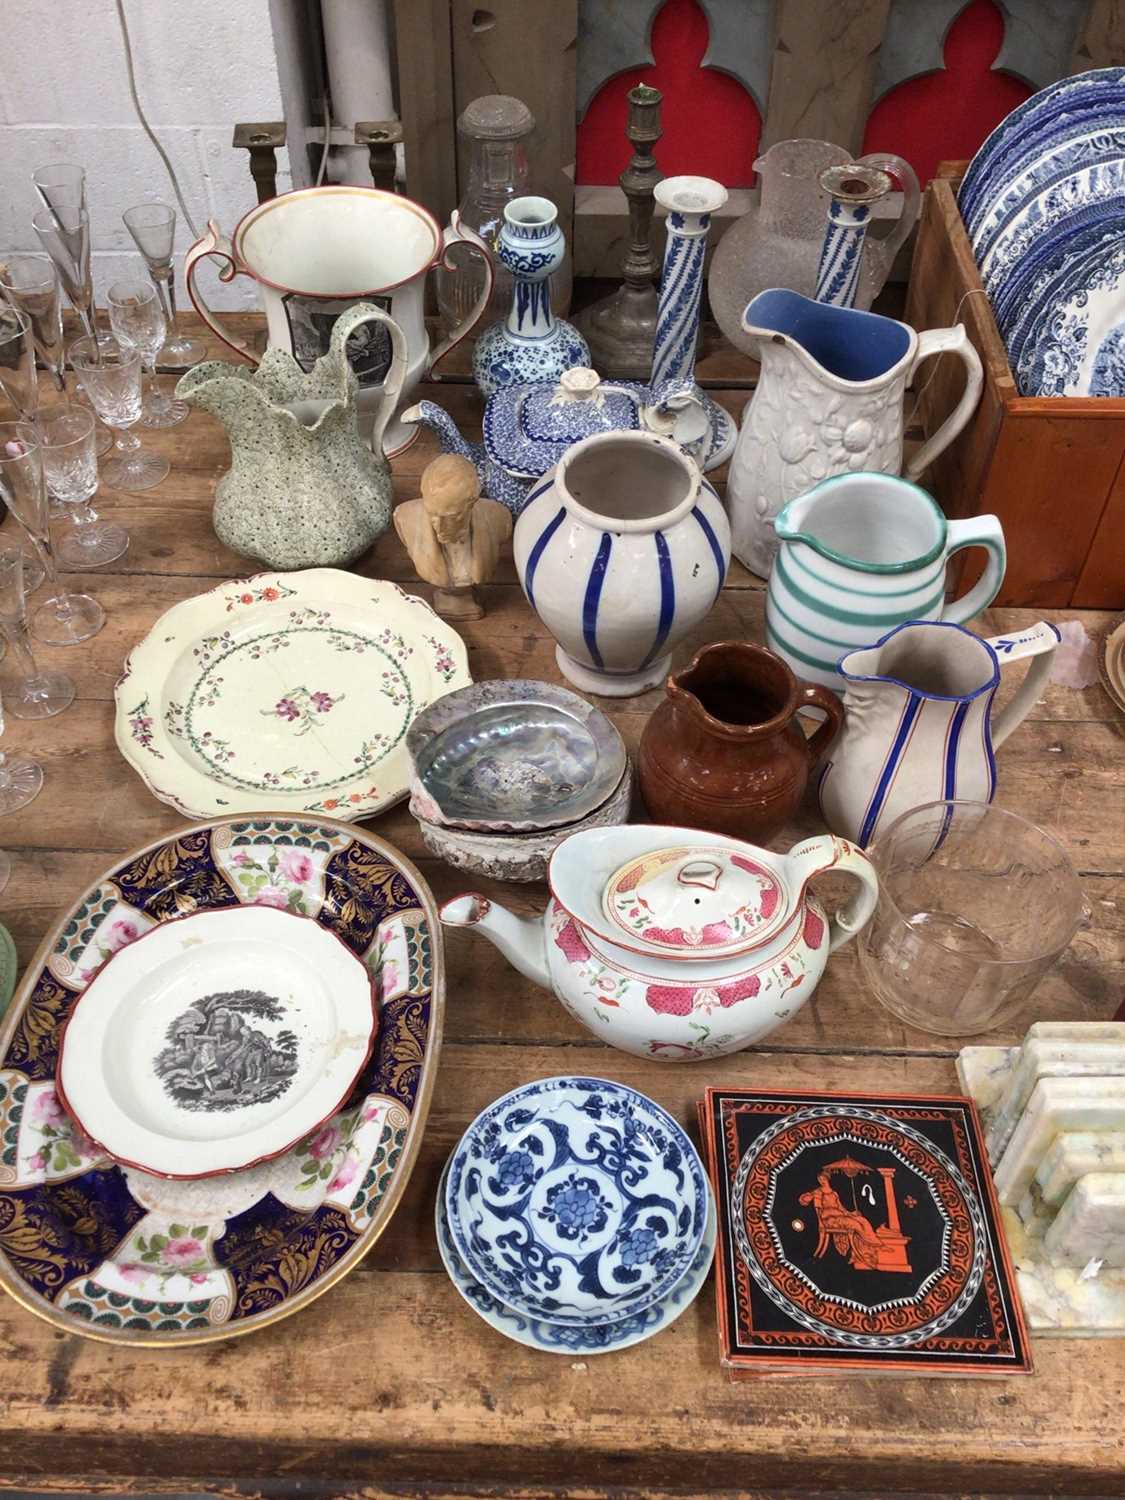 Lot 45 - Group of antique china, glass and sundries, including Delftware vase, creamware plates, Chinese saucers, tiles, Wedgwood candlesticks, etc